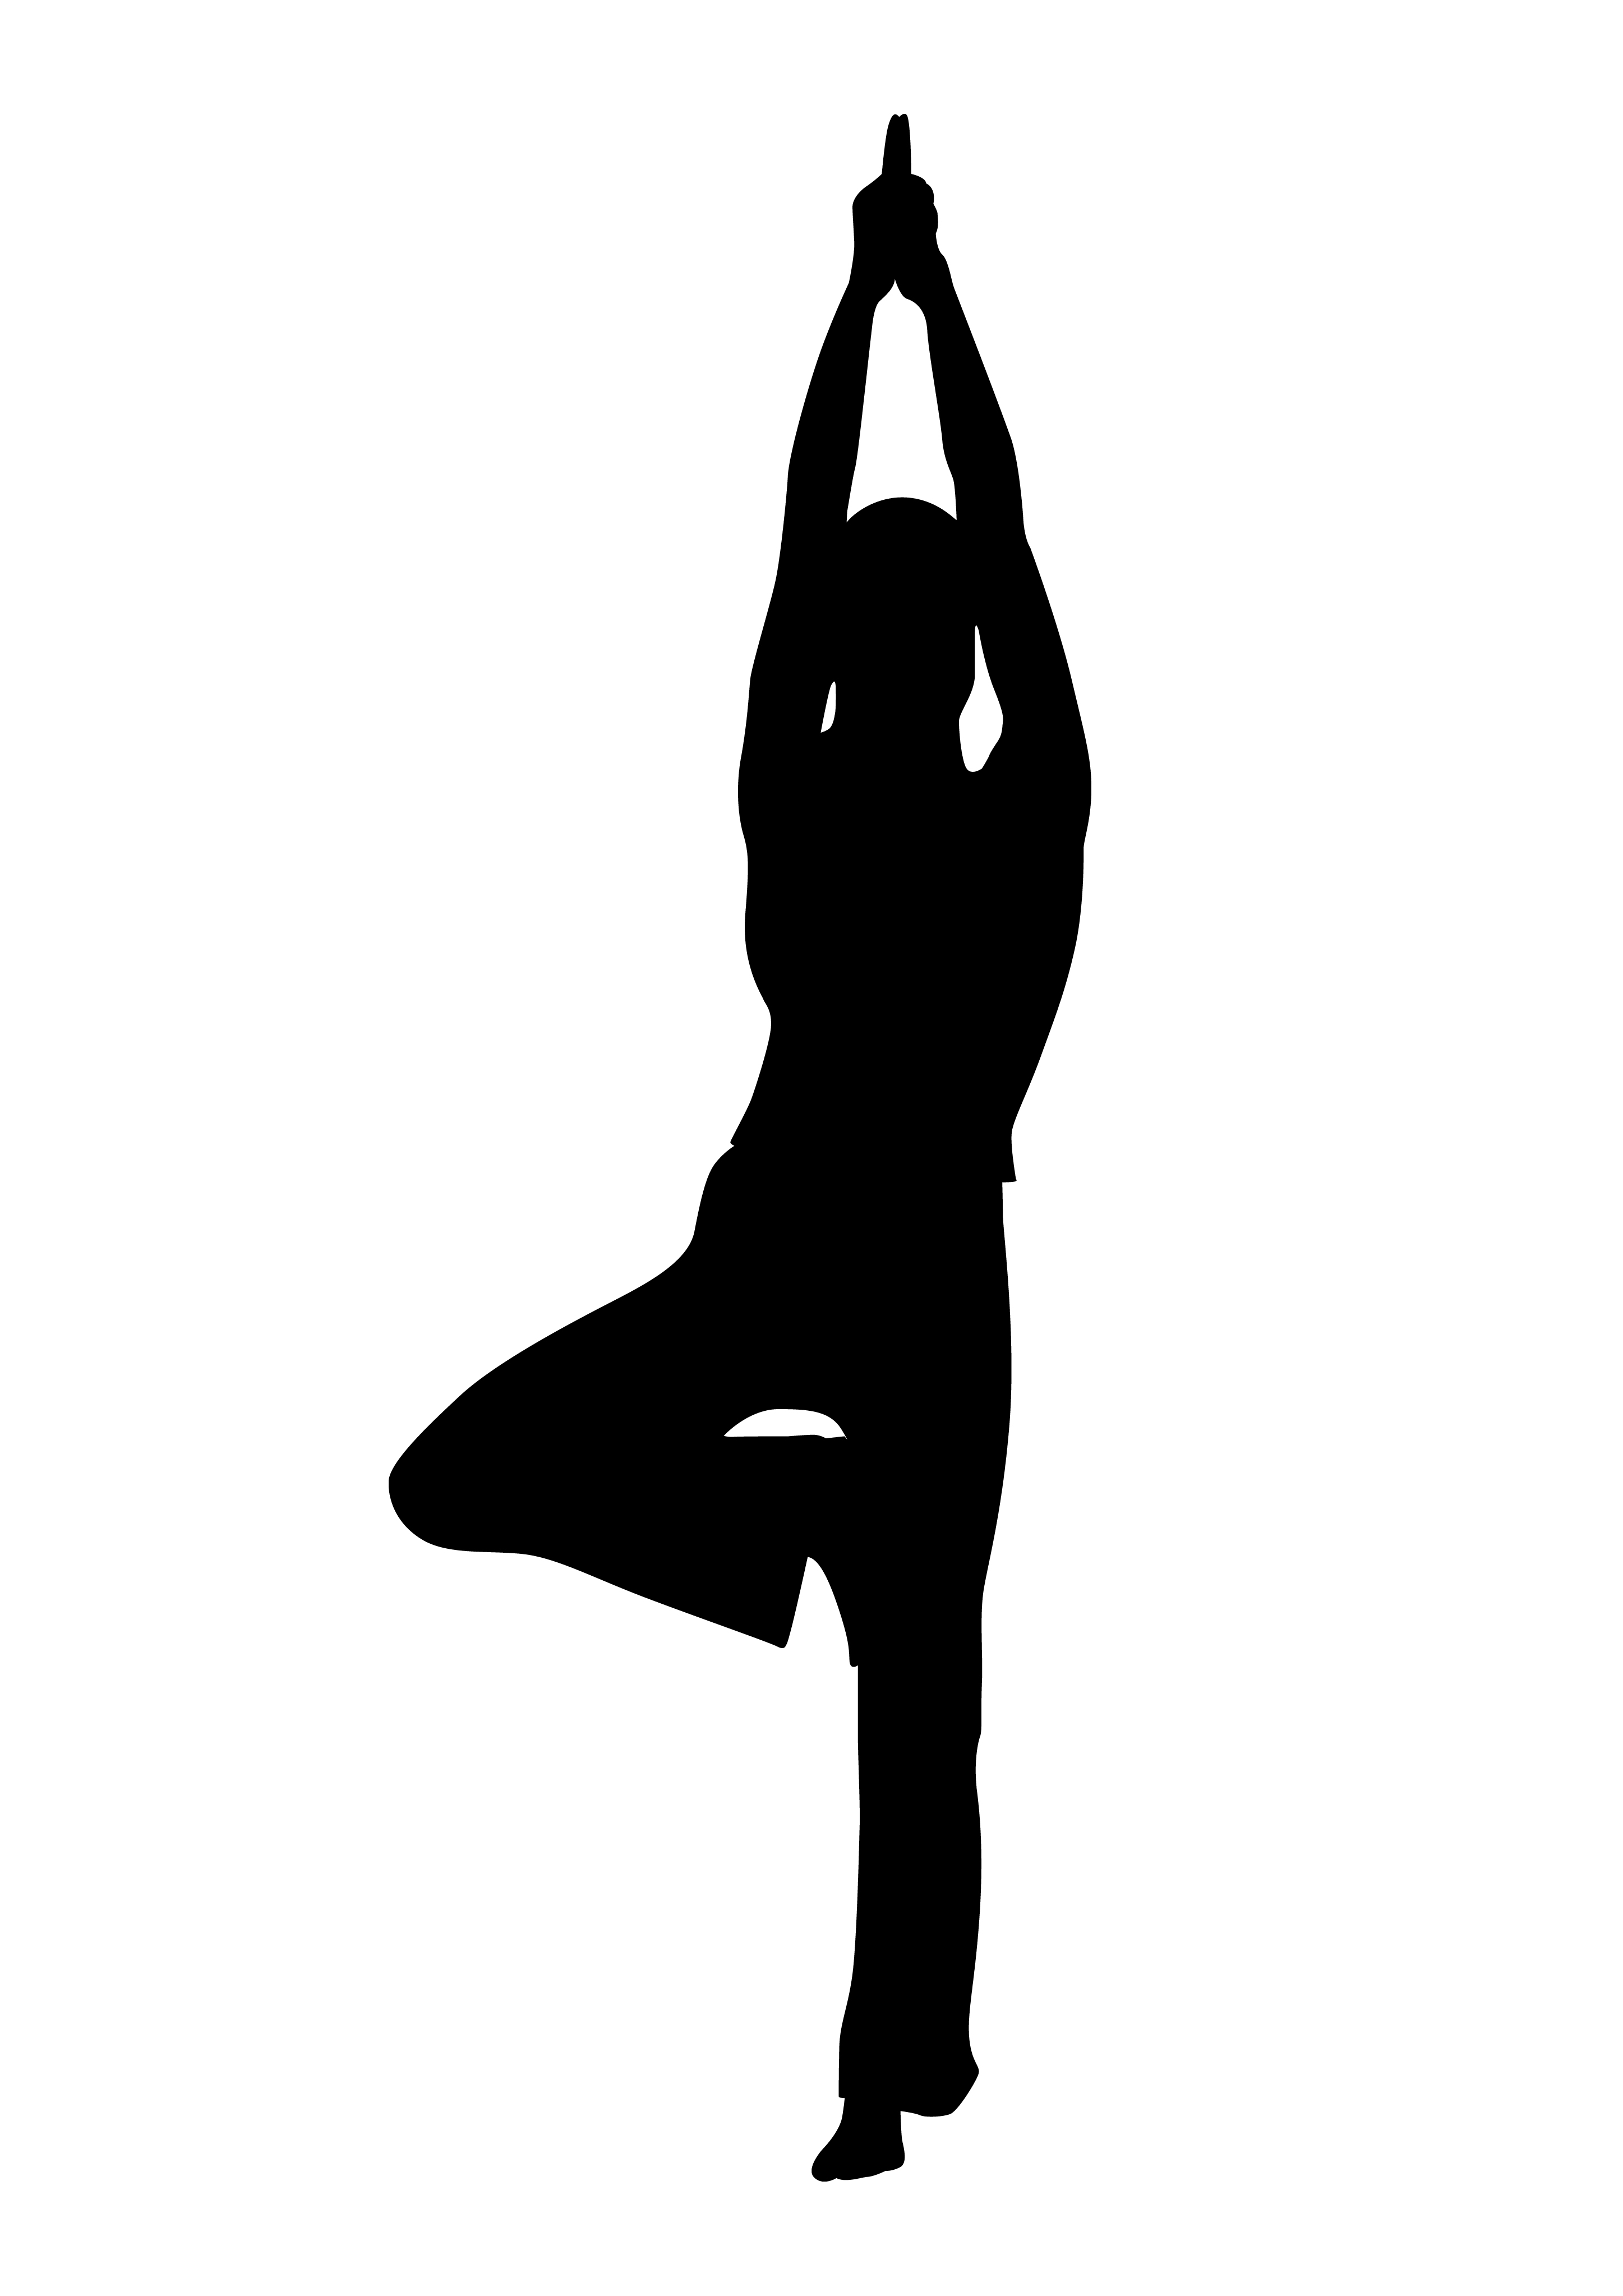 Images For > Yoga Tree Pose Clipart